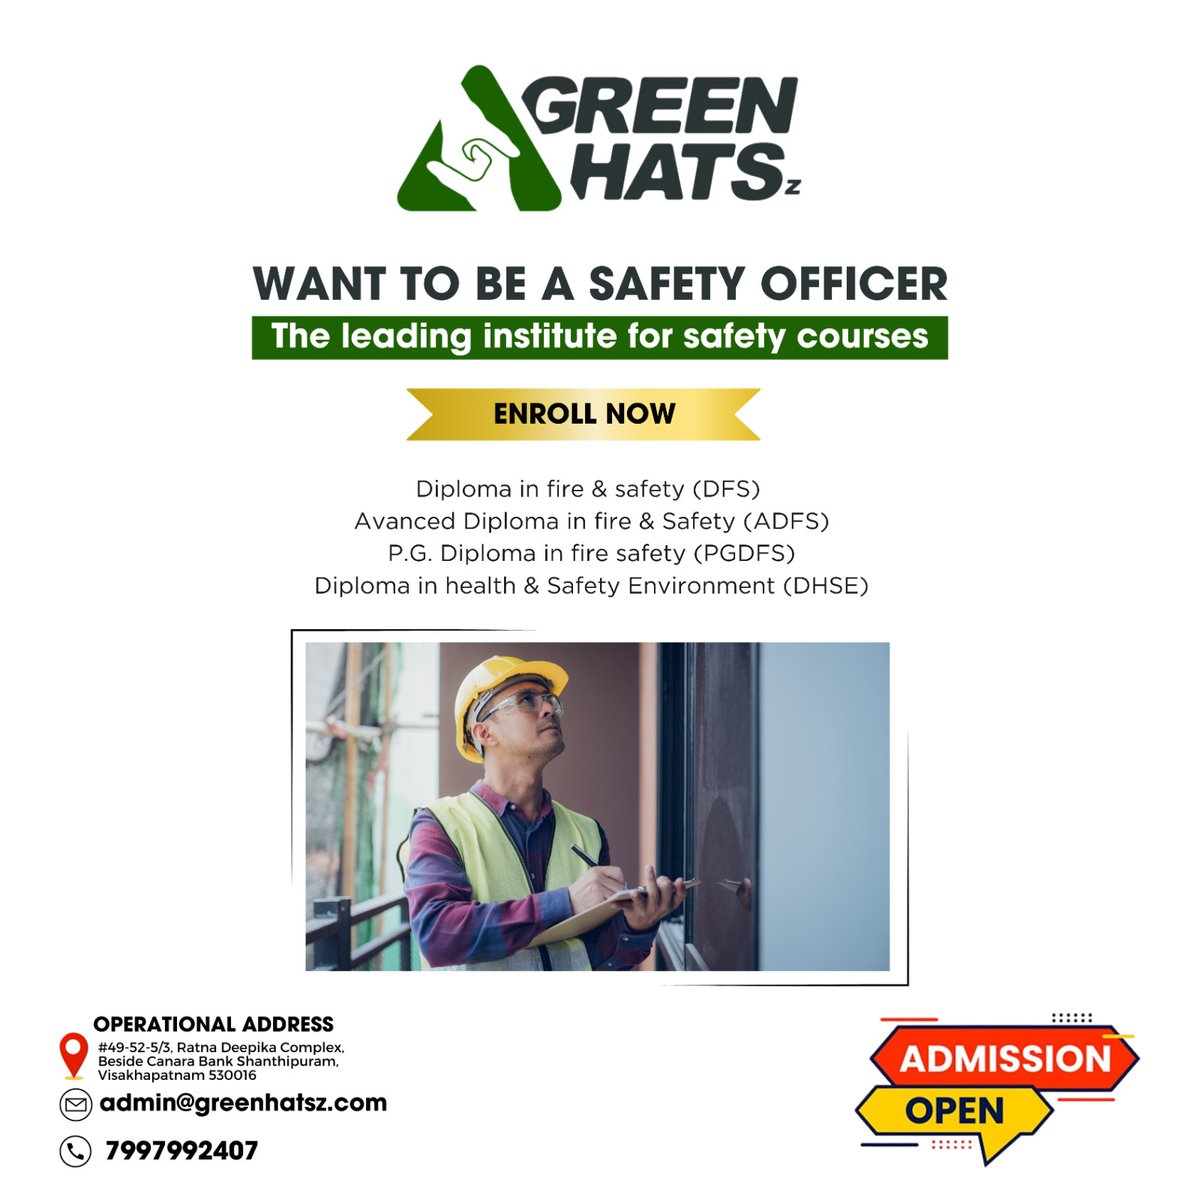 Welcome to Greenhatsz! 🎓
🛠️ Get Certified in Industrial Safety with our comprehensive one-year certificate course. Equip yourself with the knowledge and skills to ensure workplace safety and compliance.
#Greenhatsz #FireSafetyDiploma #SafetyTraining #FirePrevention #Emergency